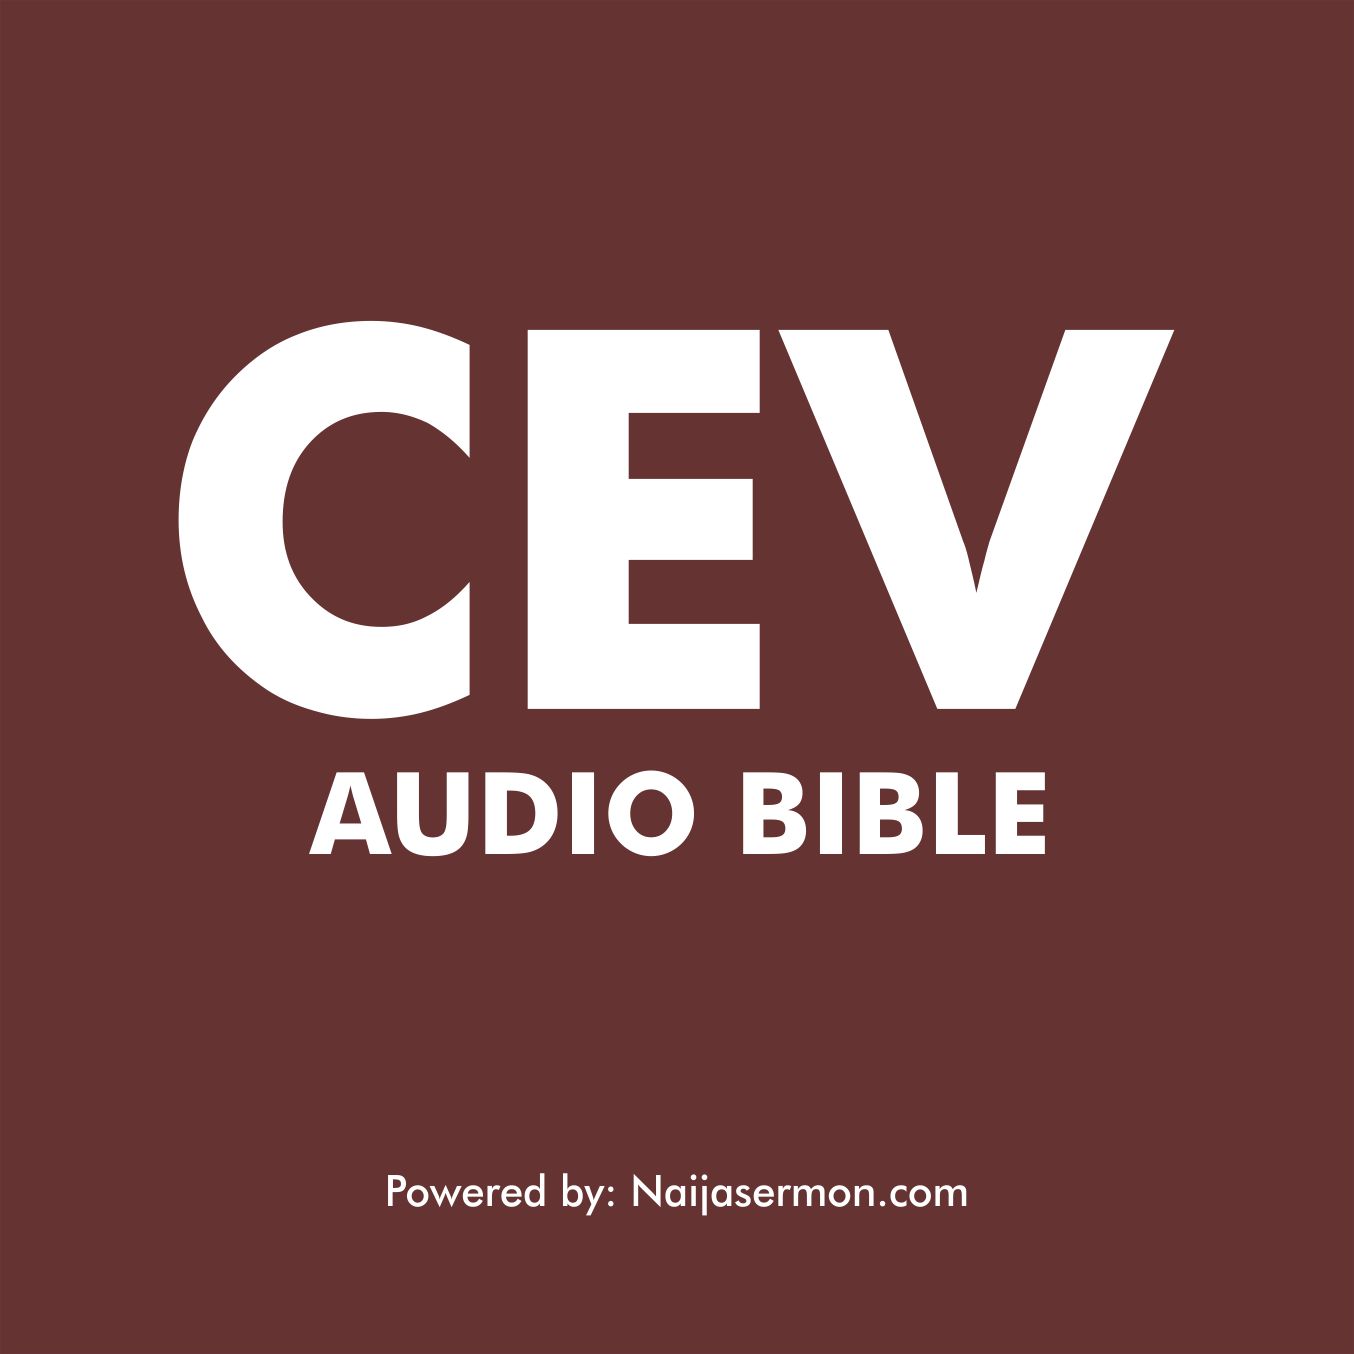 [Free] Download Contemporary English Version (CEV) Audio Bible MP3 - Dramatized 1